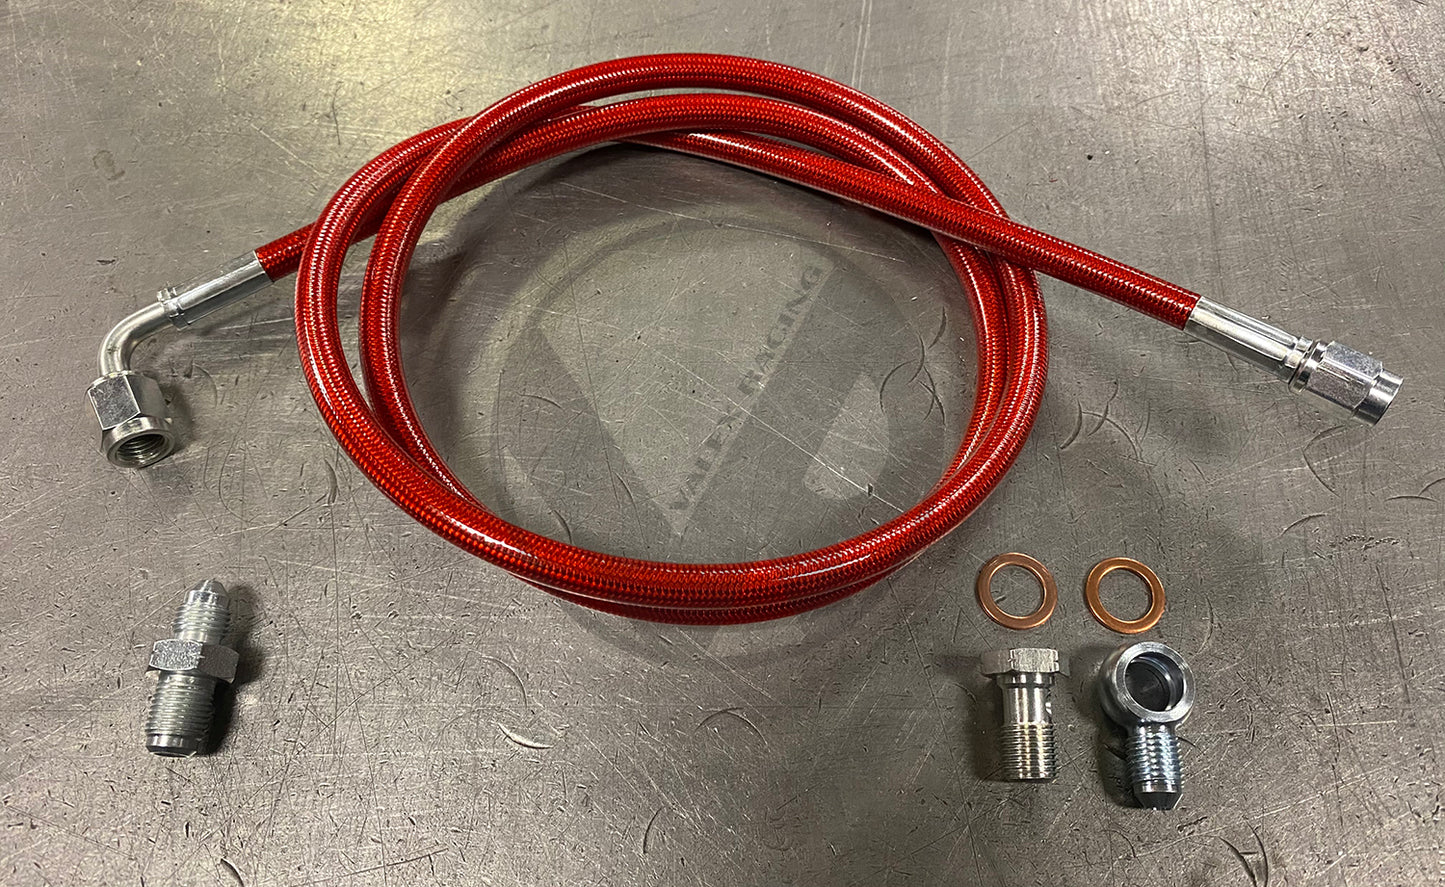 94-01 Acura Integra with K Swap Stainless Steel Clutch Line K20 K24 DC2 (7 Colors Available)